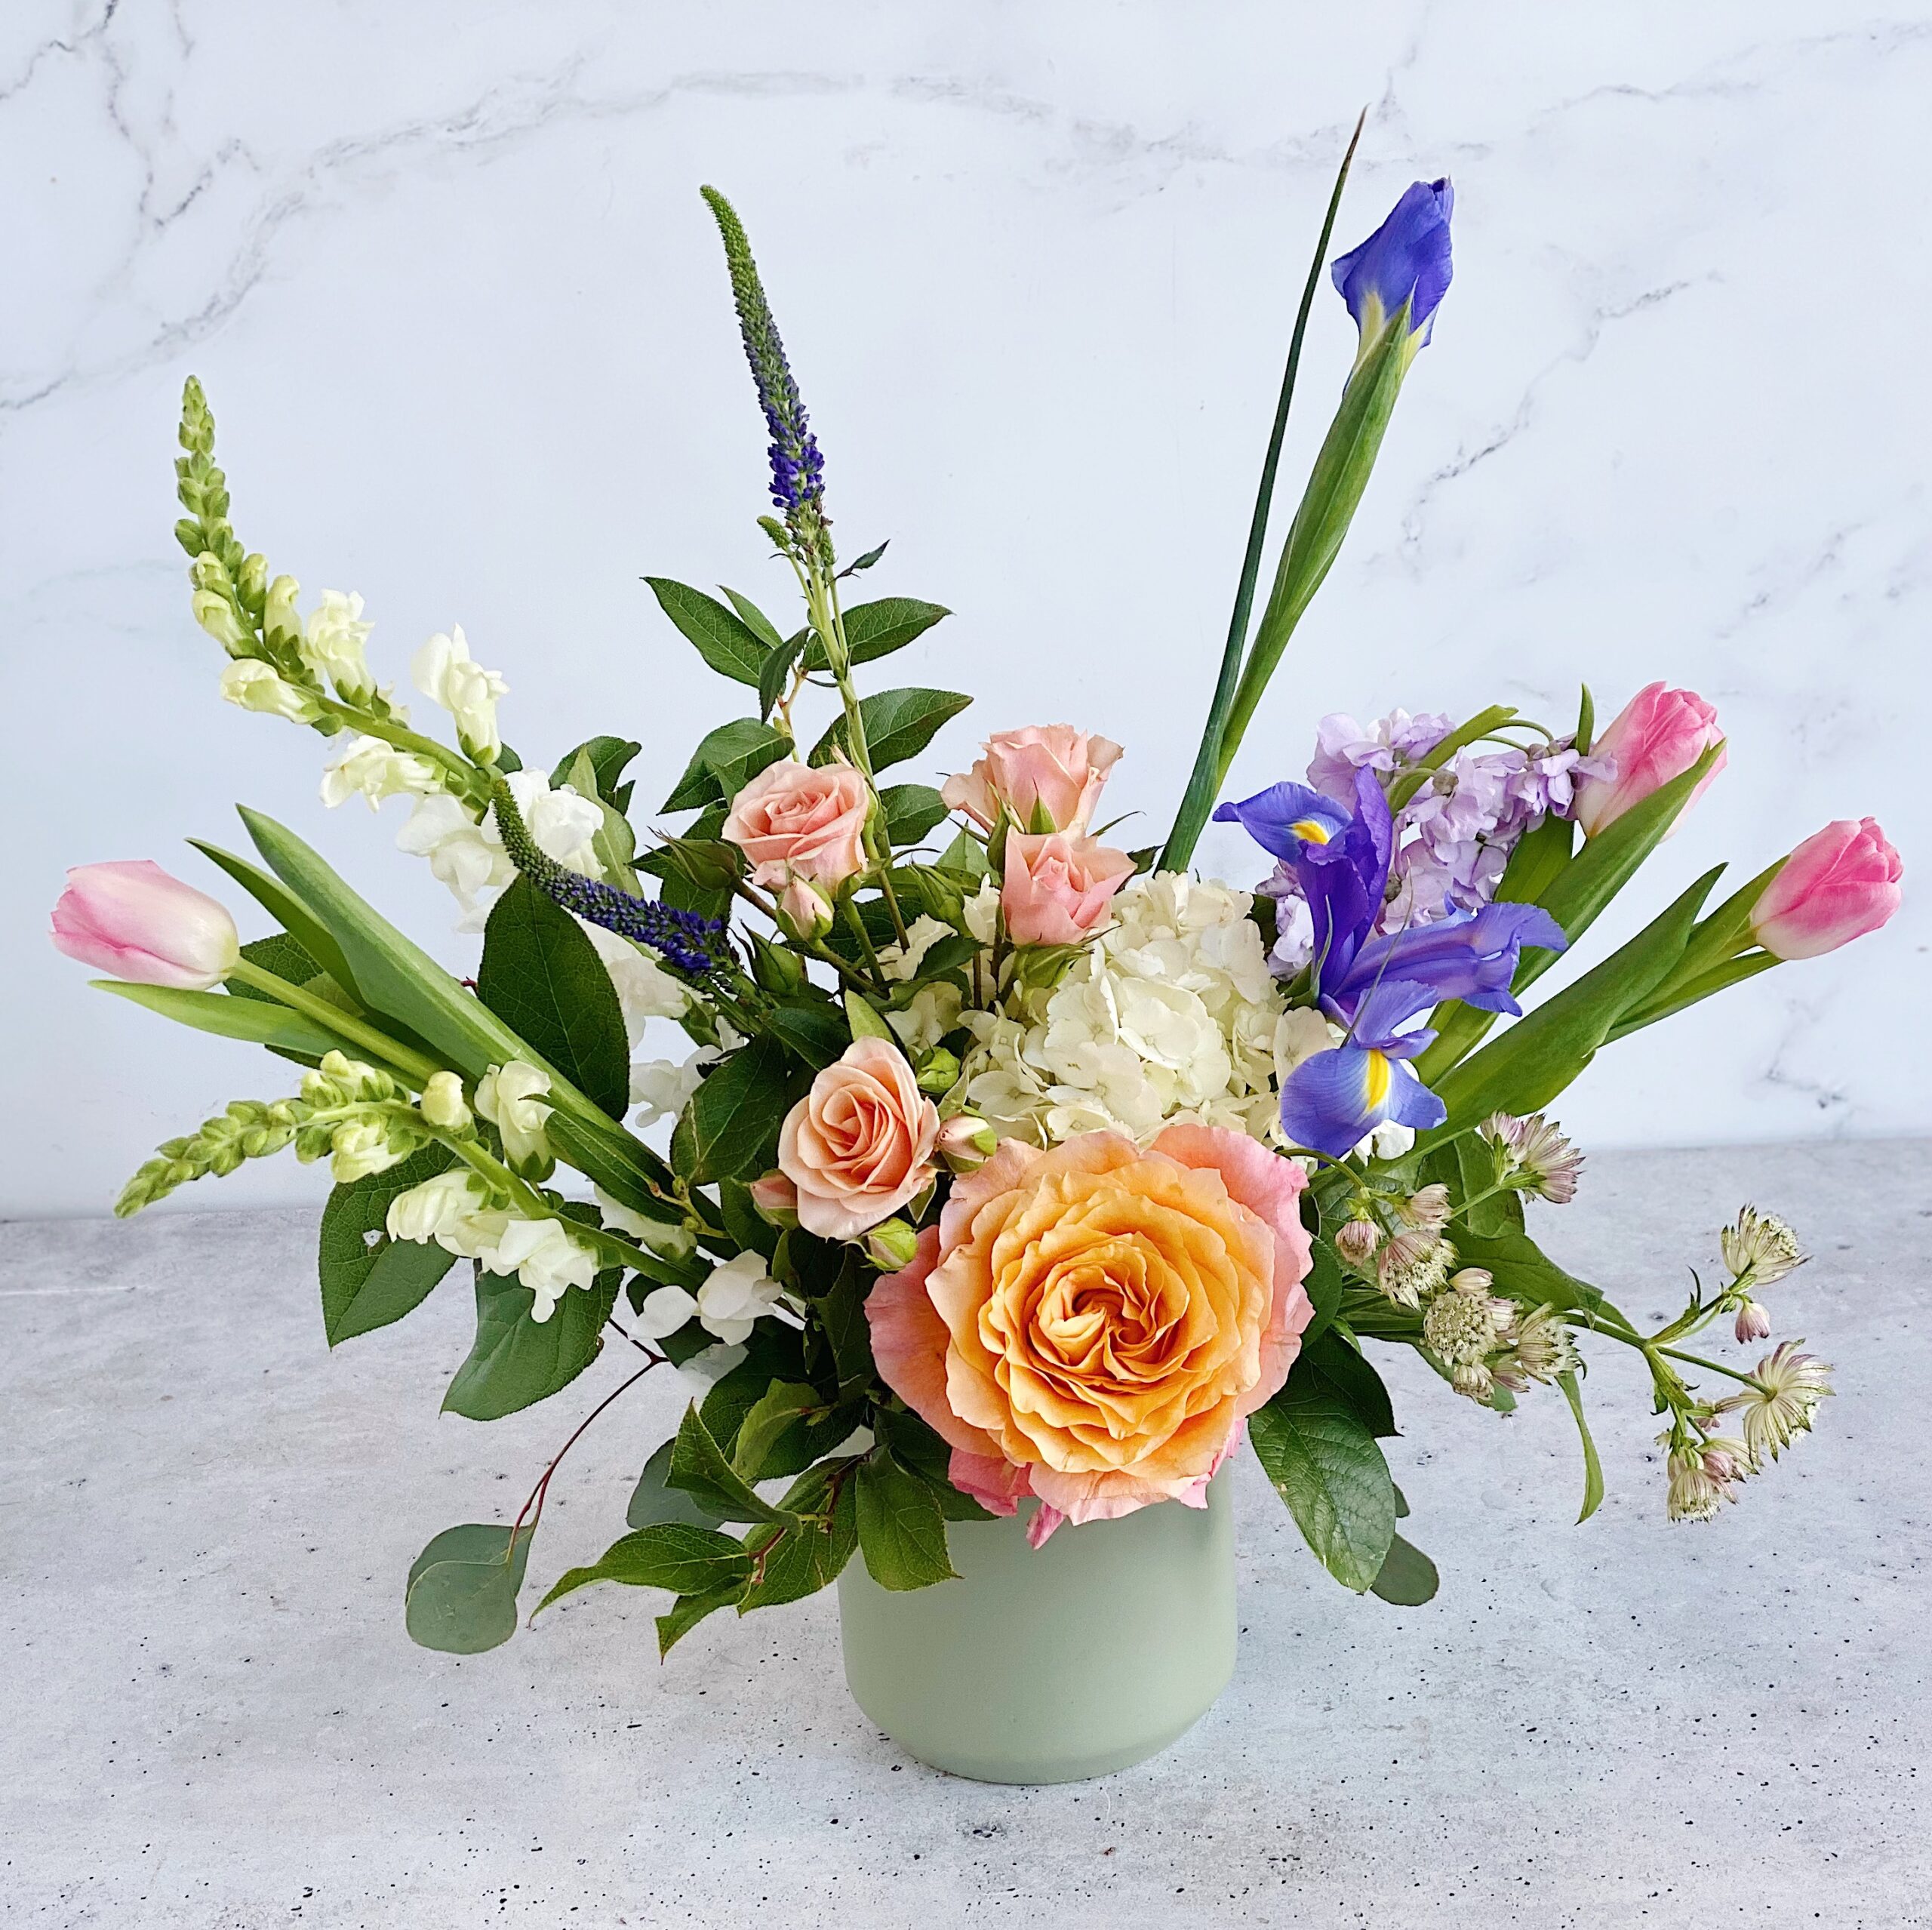 Texas Blooms & Gifts | Austin, TX Florist with Same-Day Flower Delivery